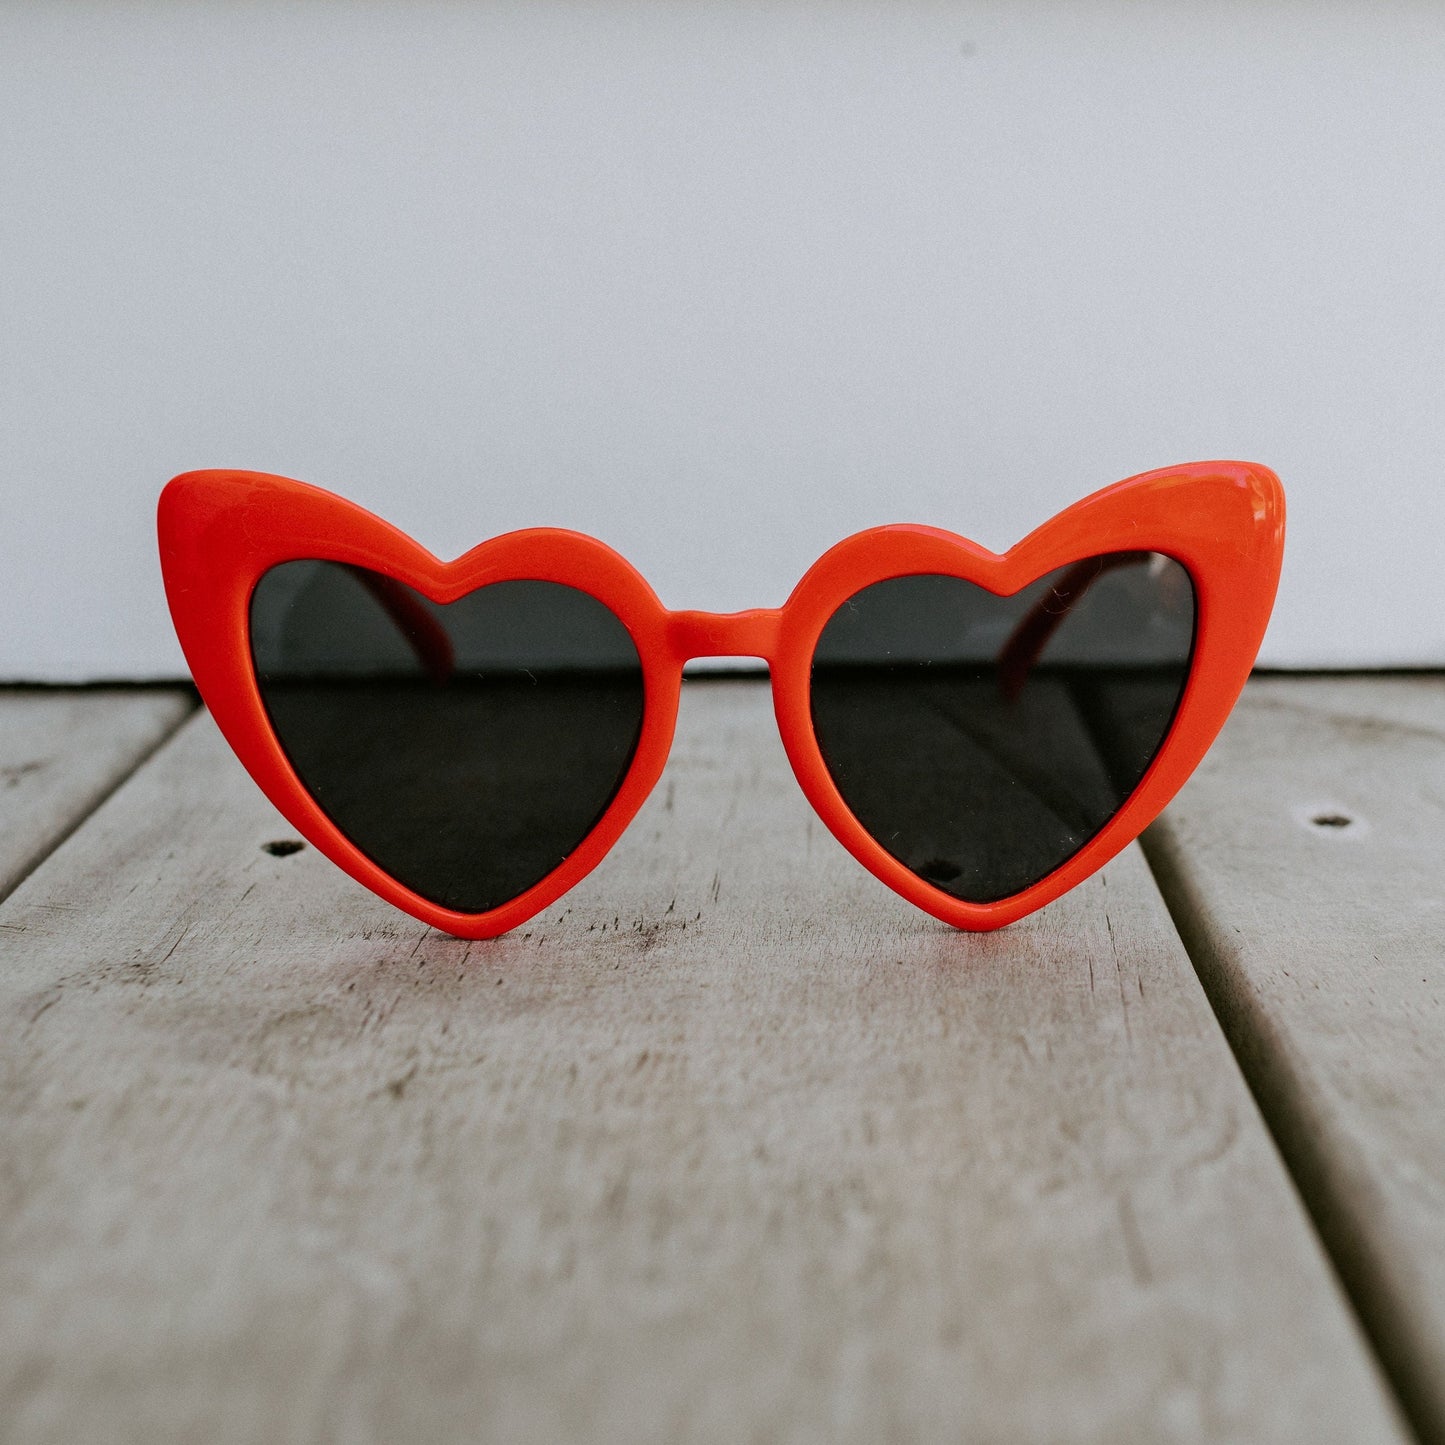 Red Love Heart Sunglasses by Sadie Baby